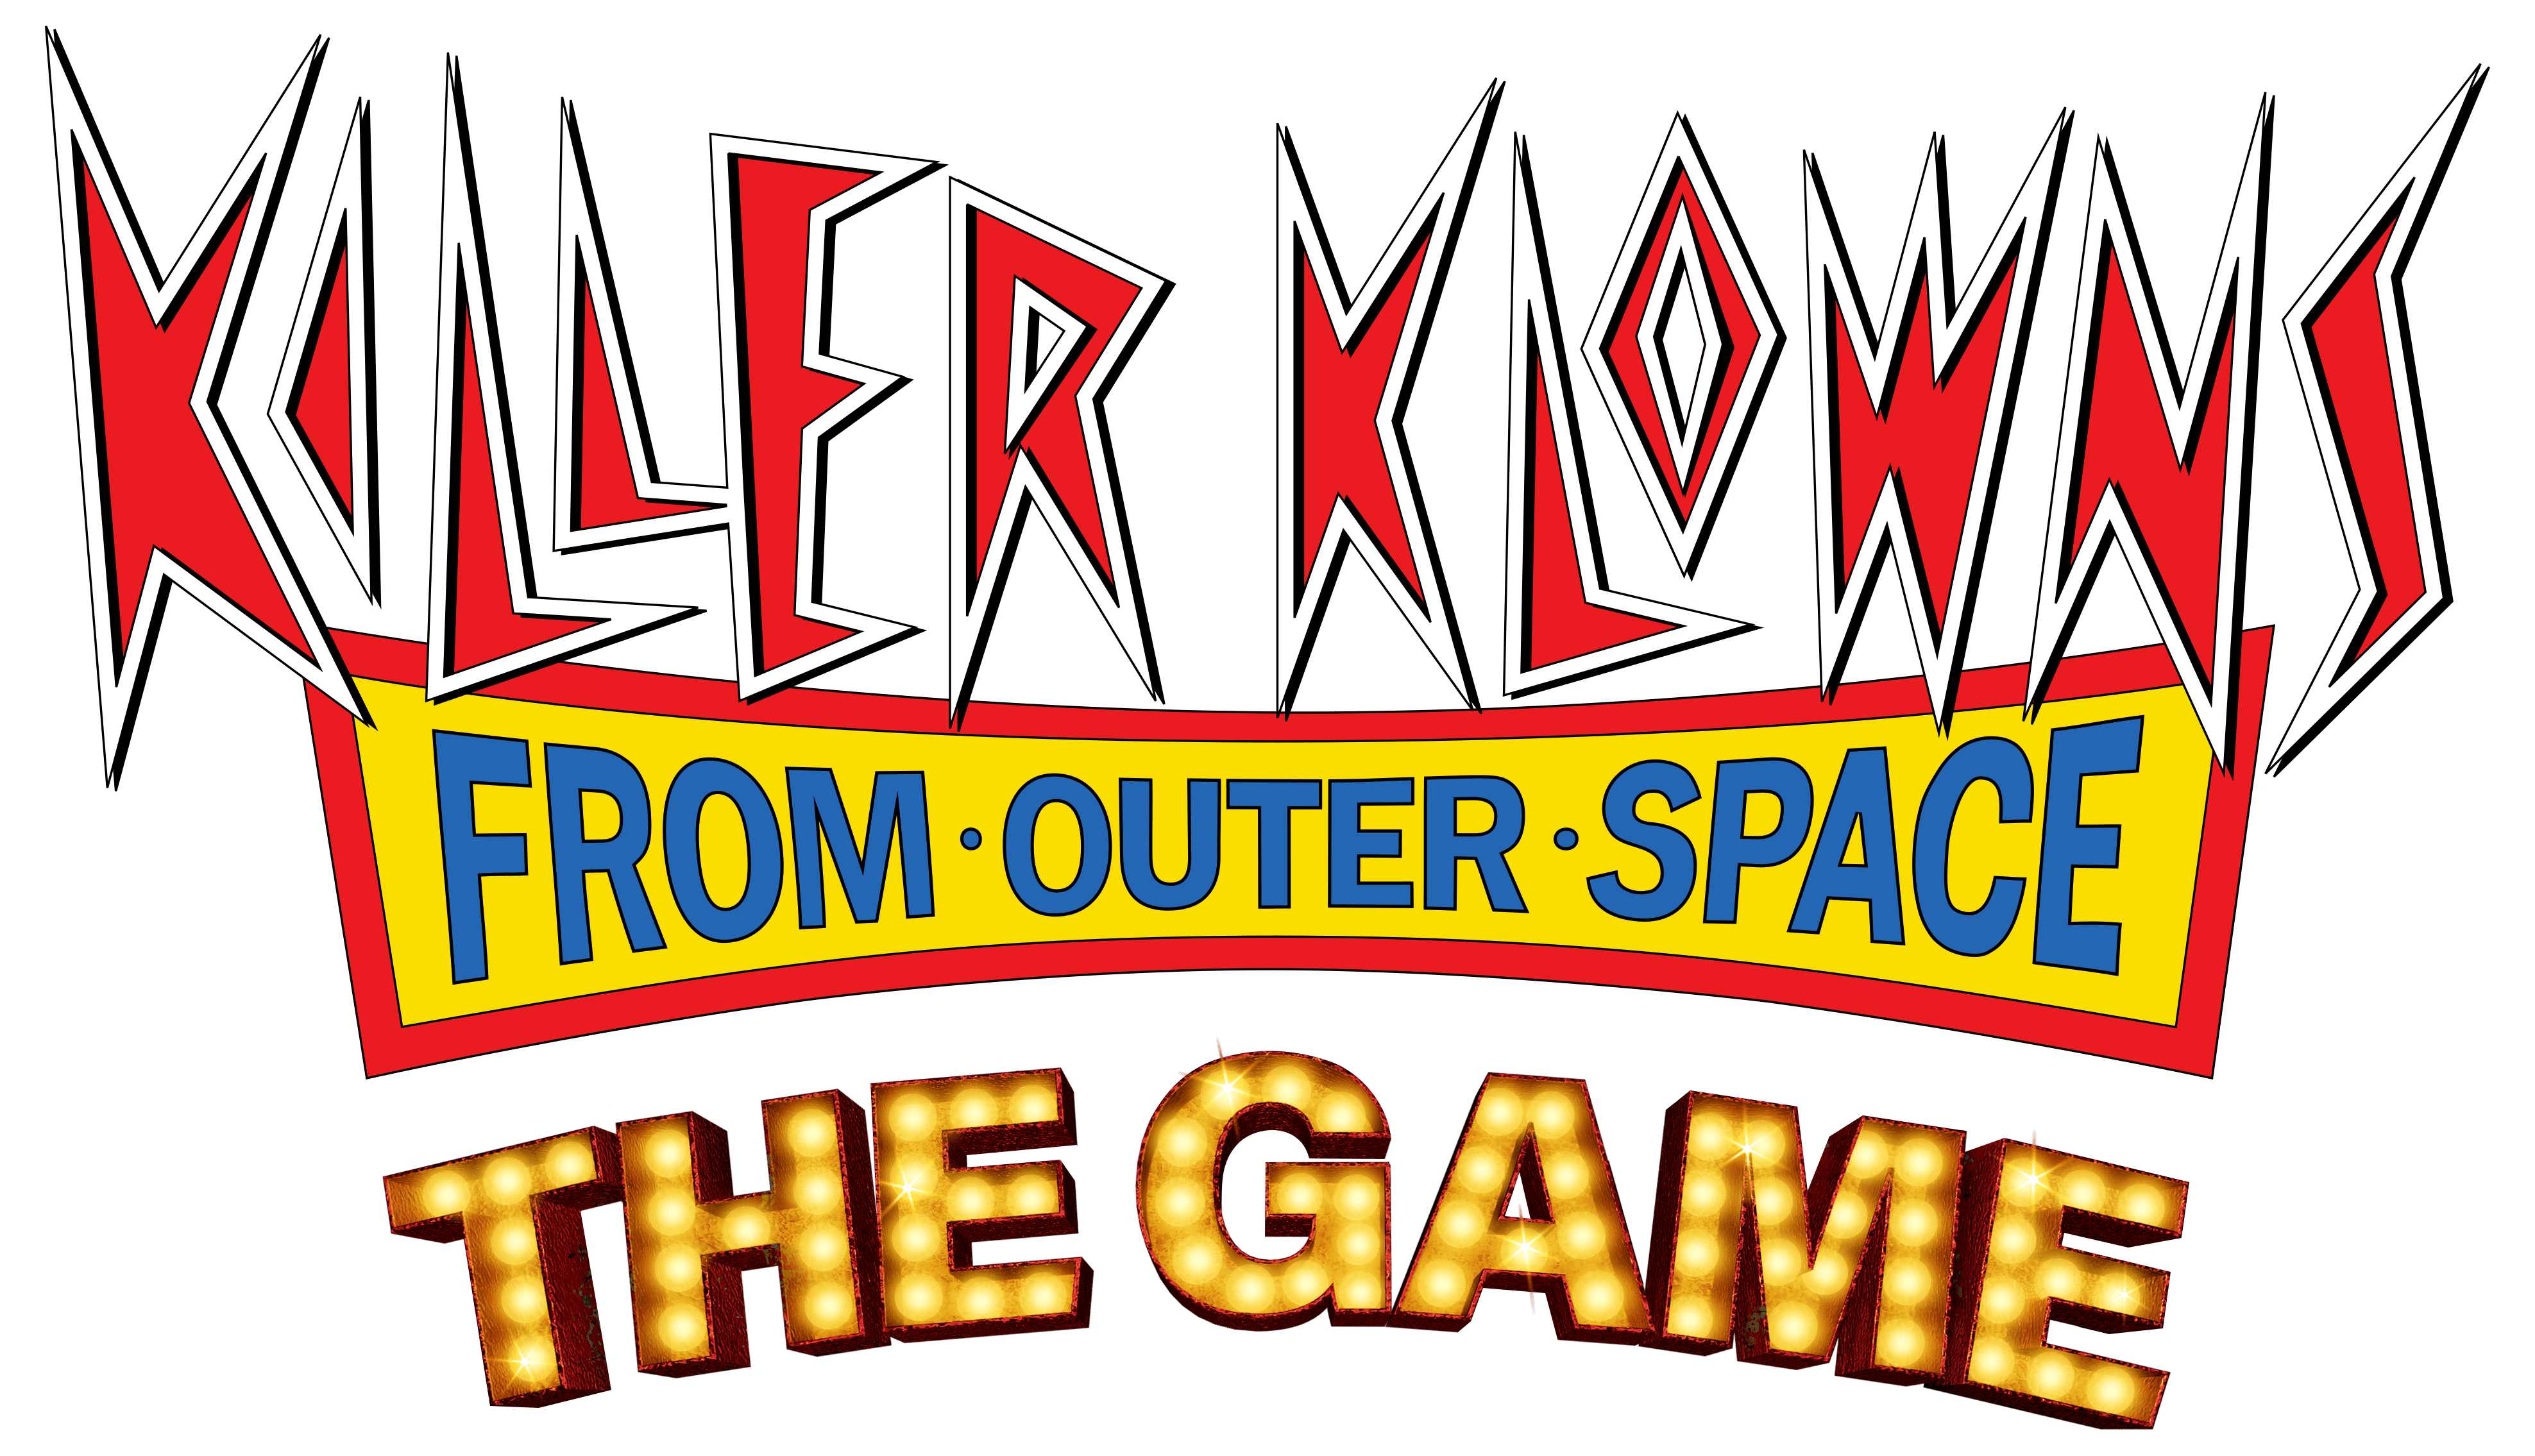 Killer Klowns from Outer Space the game. Killer Klowns from Outer Space. Killer Klowns from Outer игра. Killer Klowns from Outer Space Comics. Killer from outer space